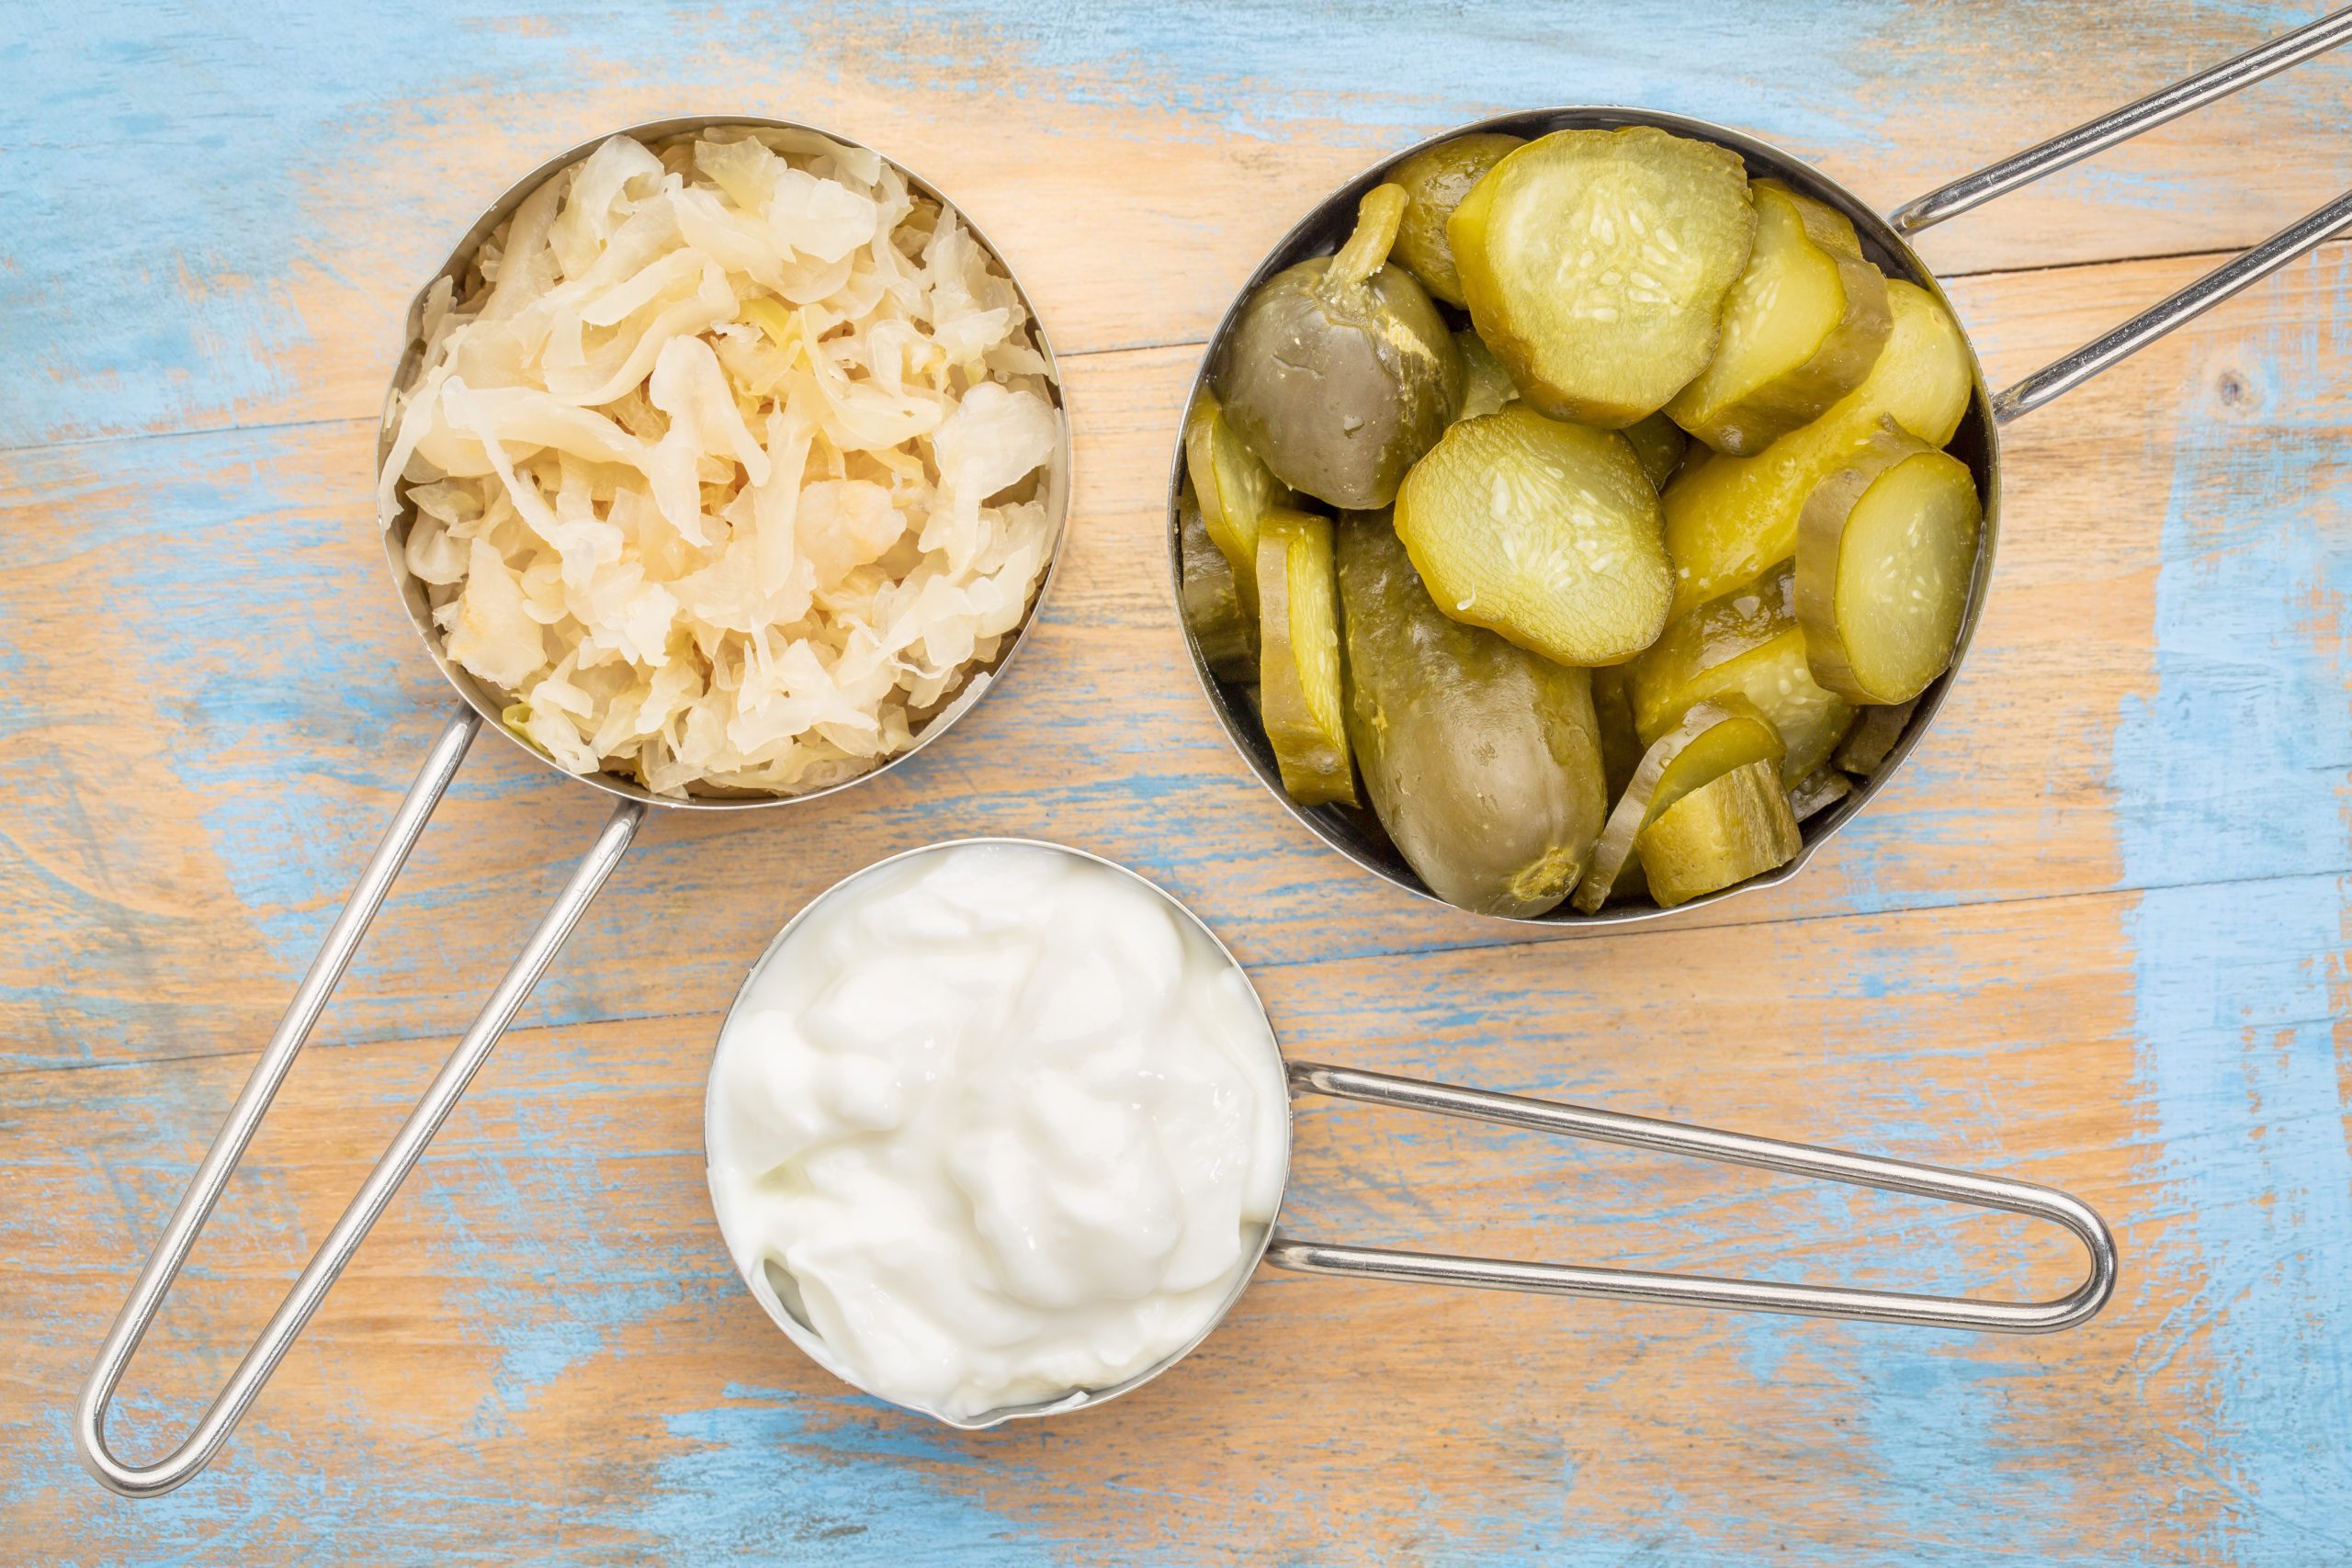 What you need to know about fermented foods’ health benefits